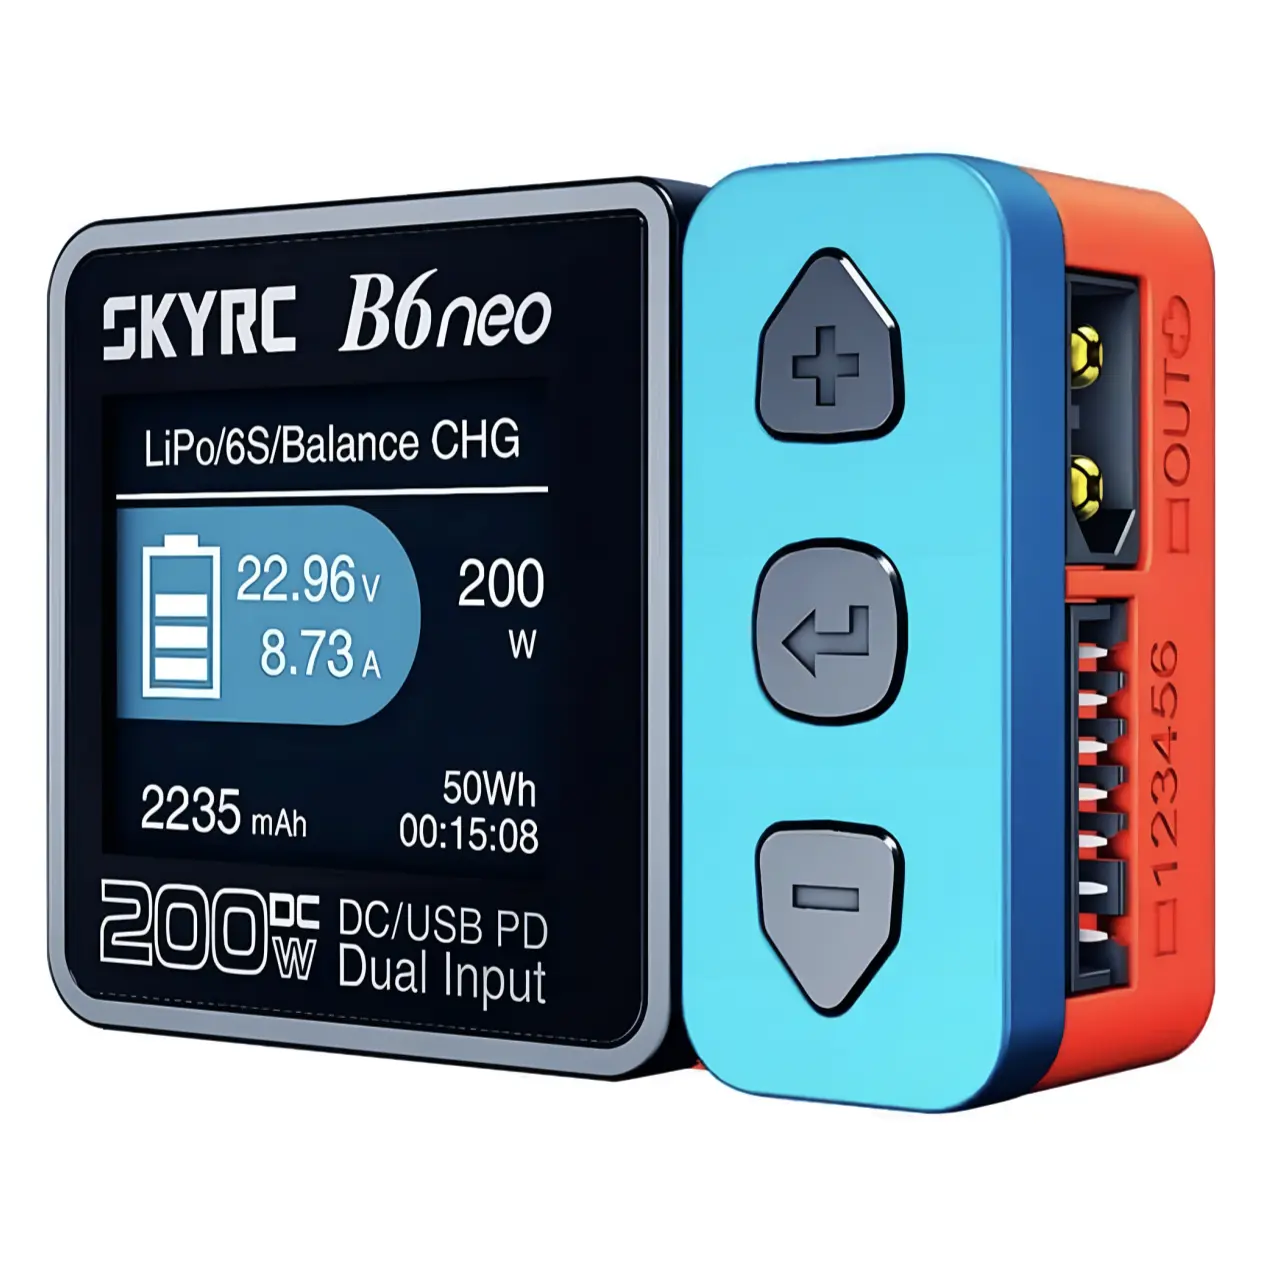 SKYRC B6 Neo 200W Smart Charger - Front View